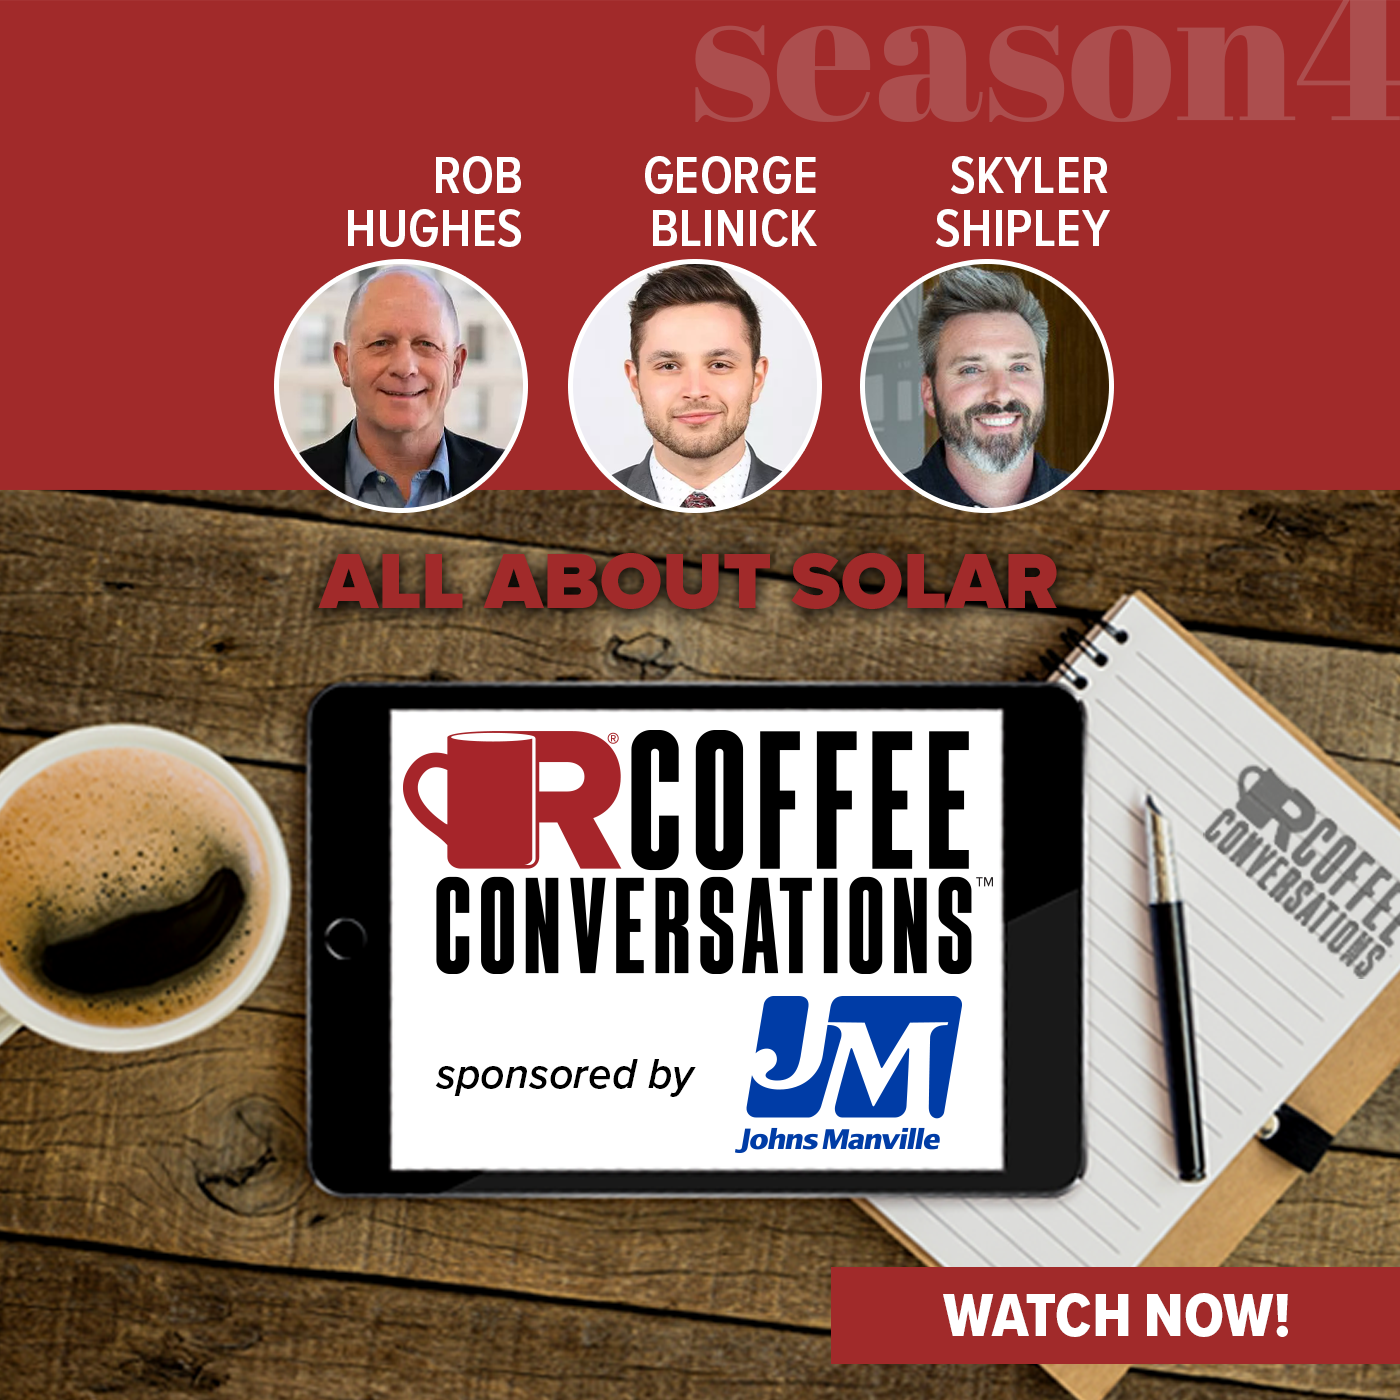 JM - Coffee Conversations - All Things Solar Sponsored by Johns Manville - POD